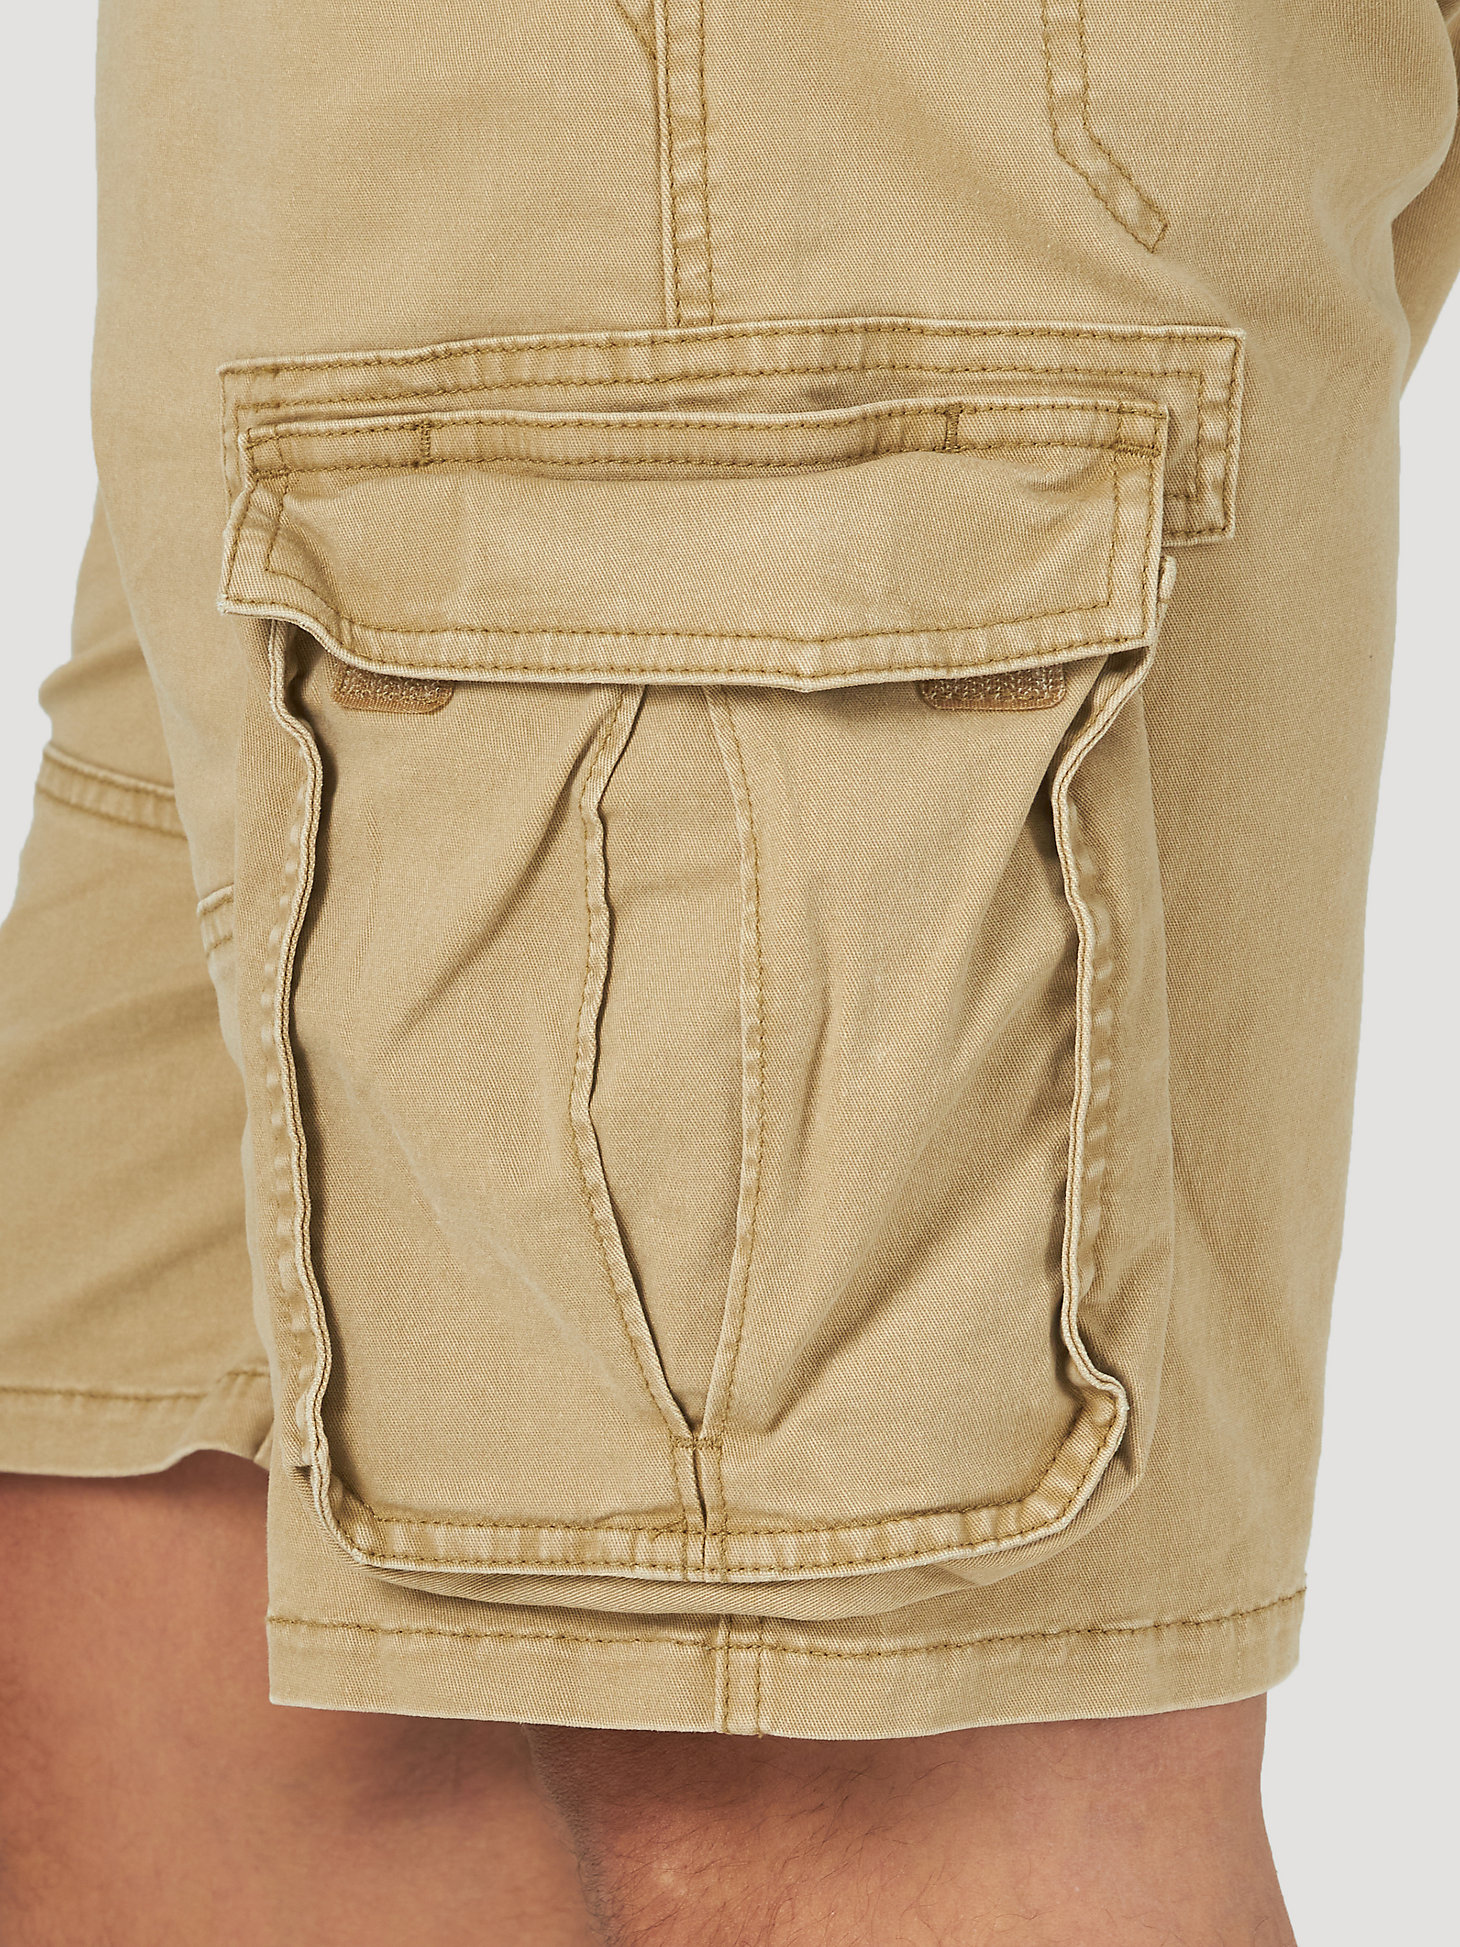 Men's Free To Stretch™ Relaxed Fit Cargo Short in Timber alternative view 4